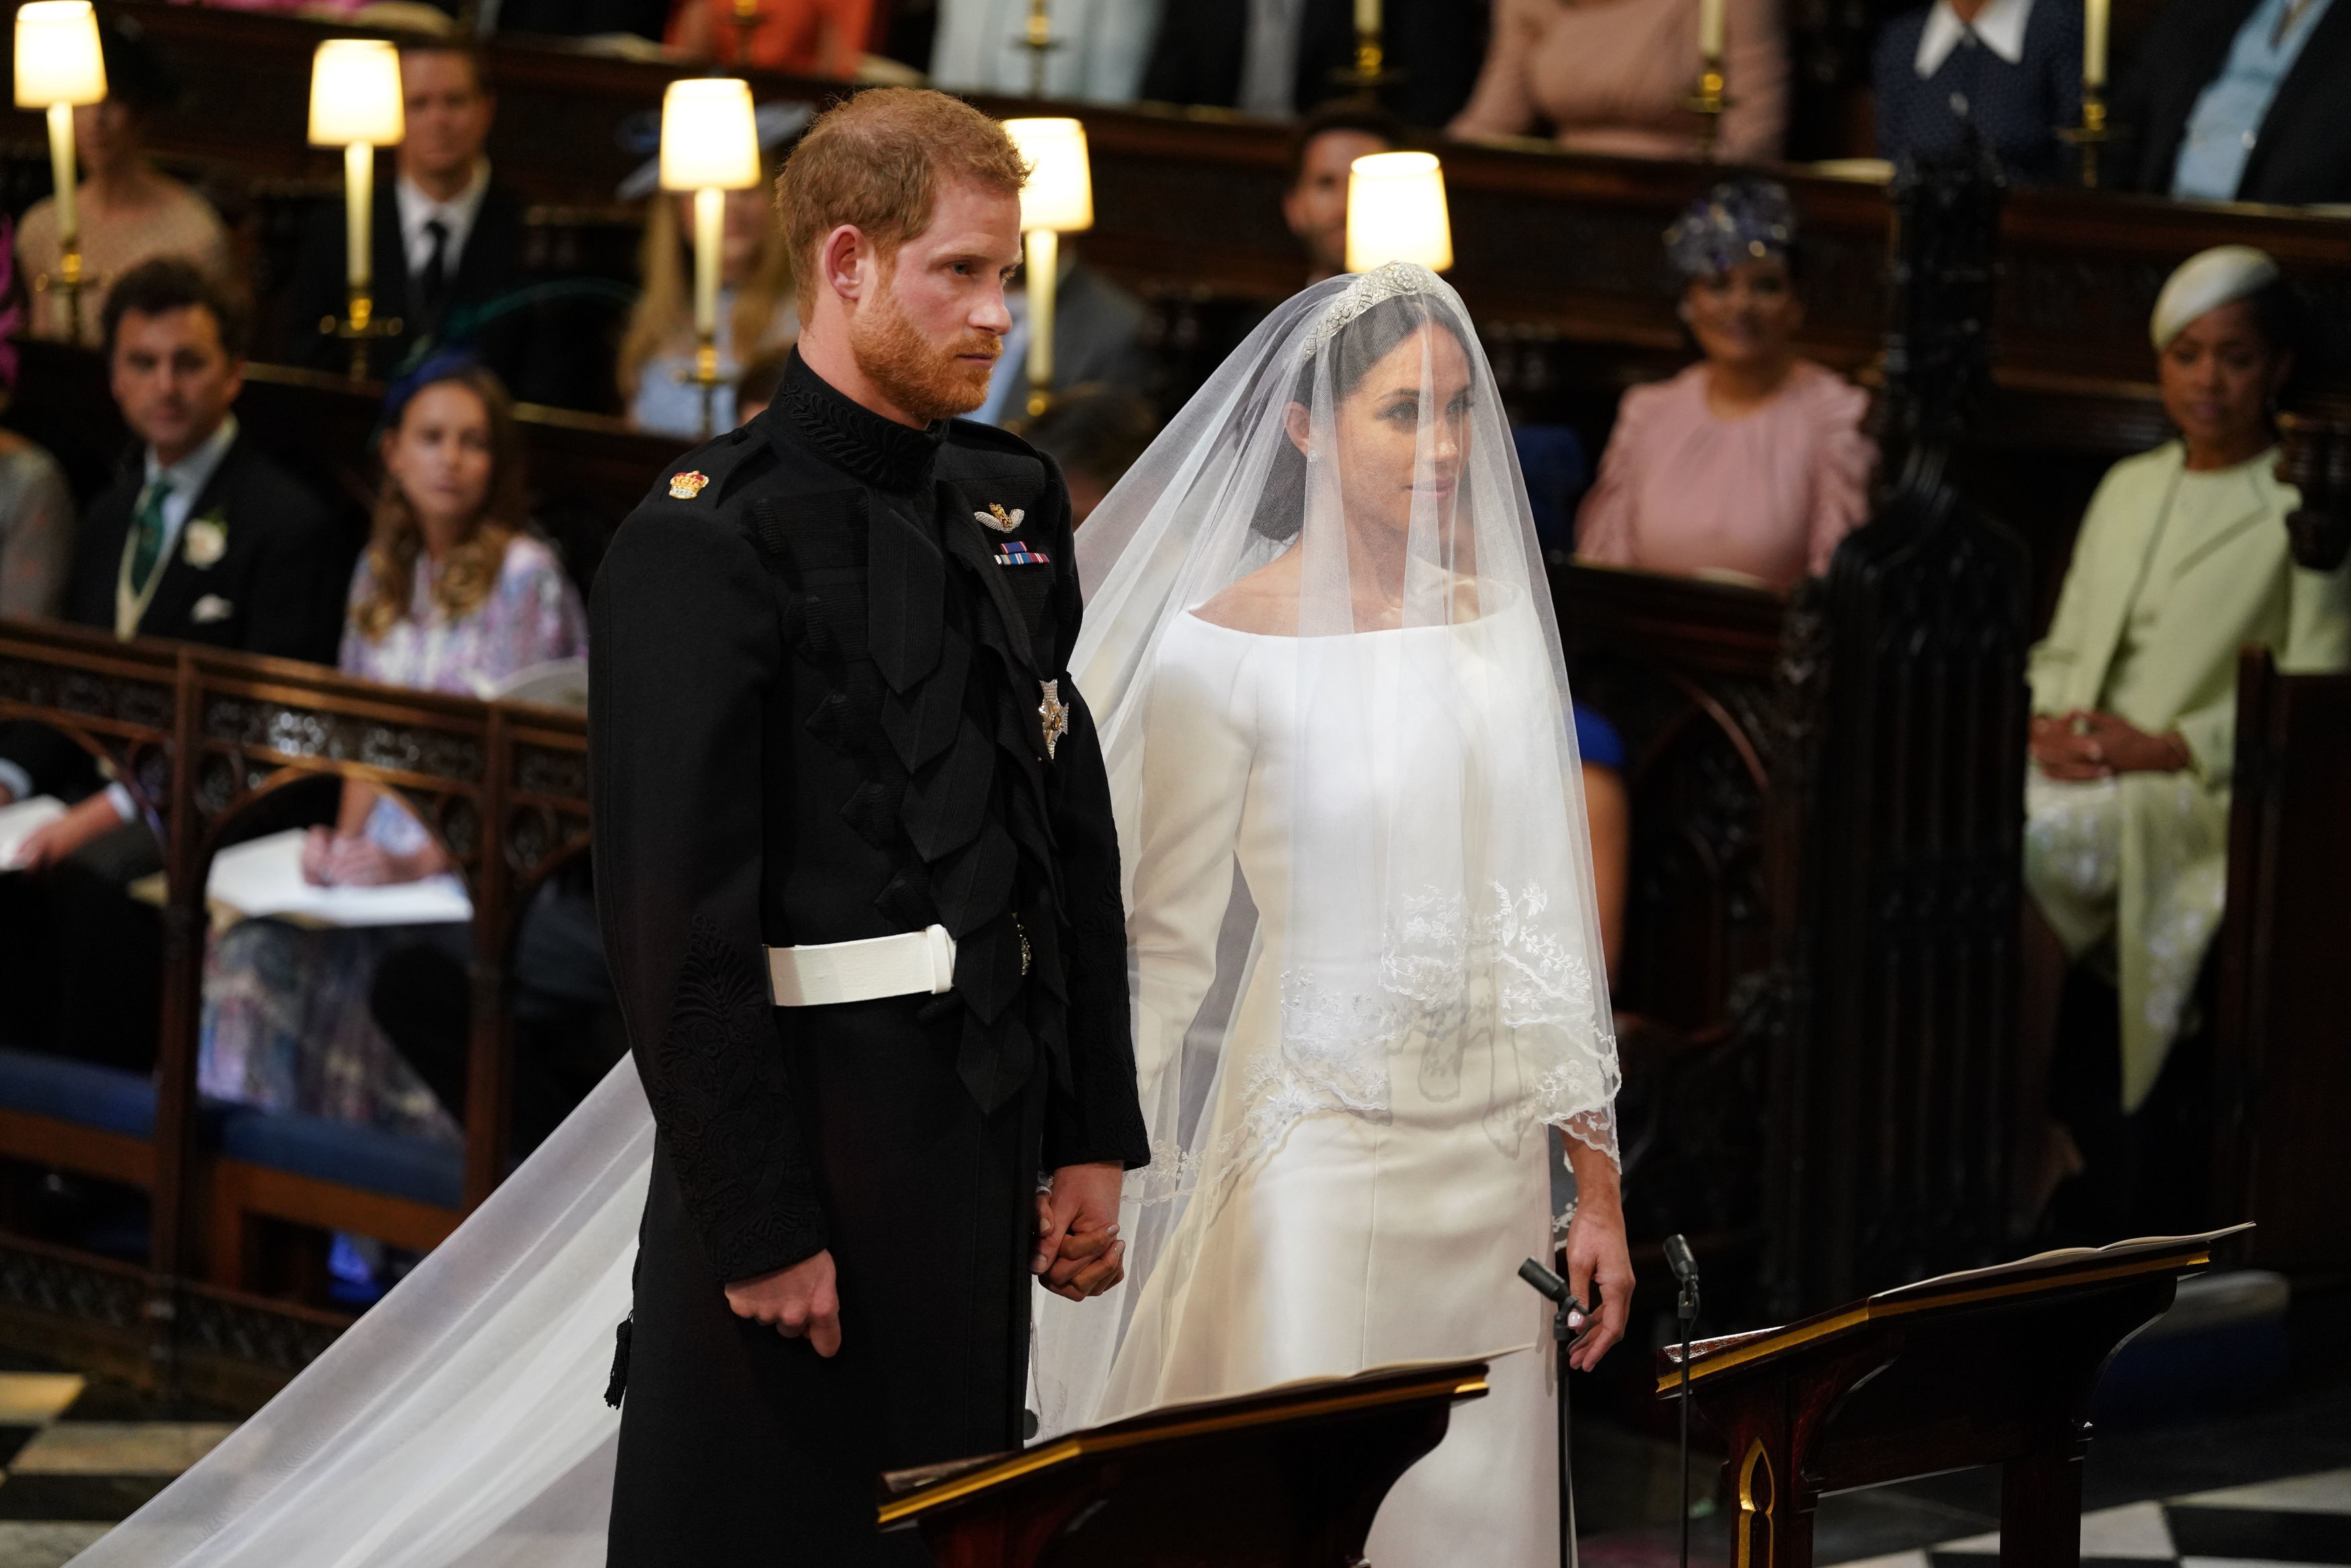 Britain's Prince Harry, Duke of Sussex and Meghan Markle stand together for their wedding in St George's Chapel, Windsor Castle, in Windsor, on May 19, 2018. | Source: Getty Images